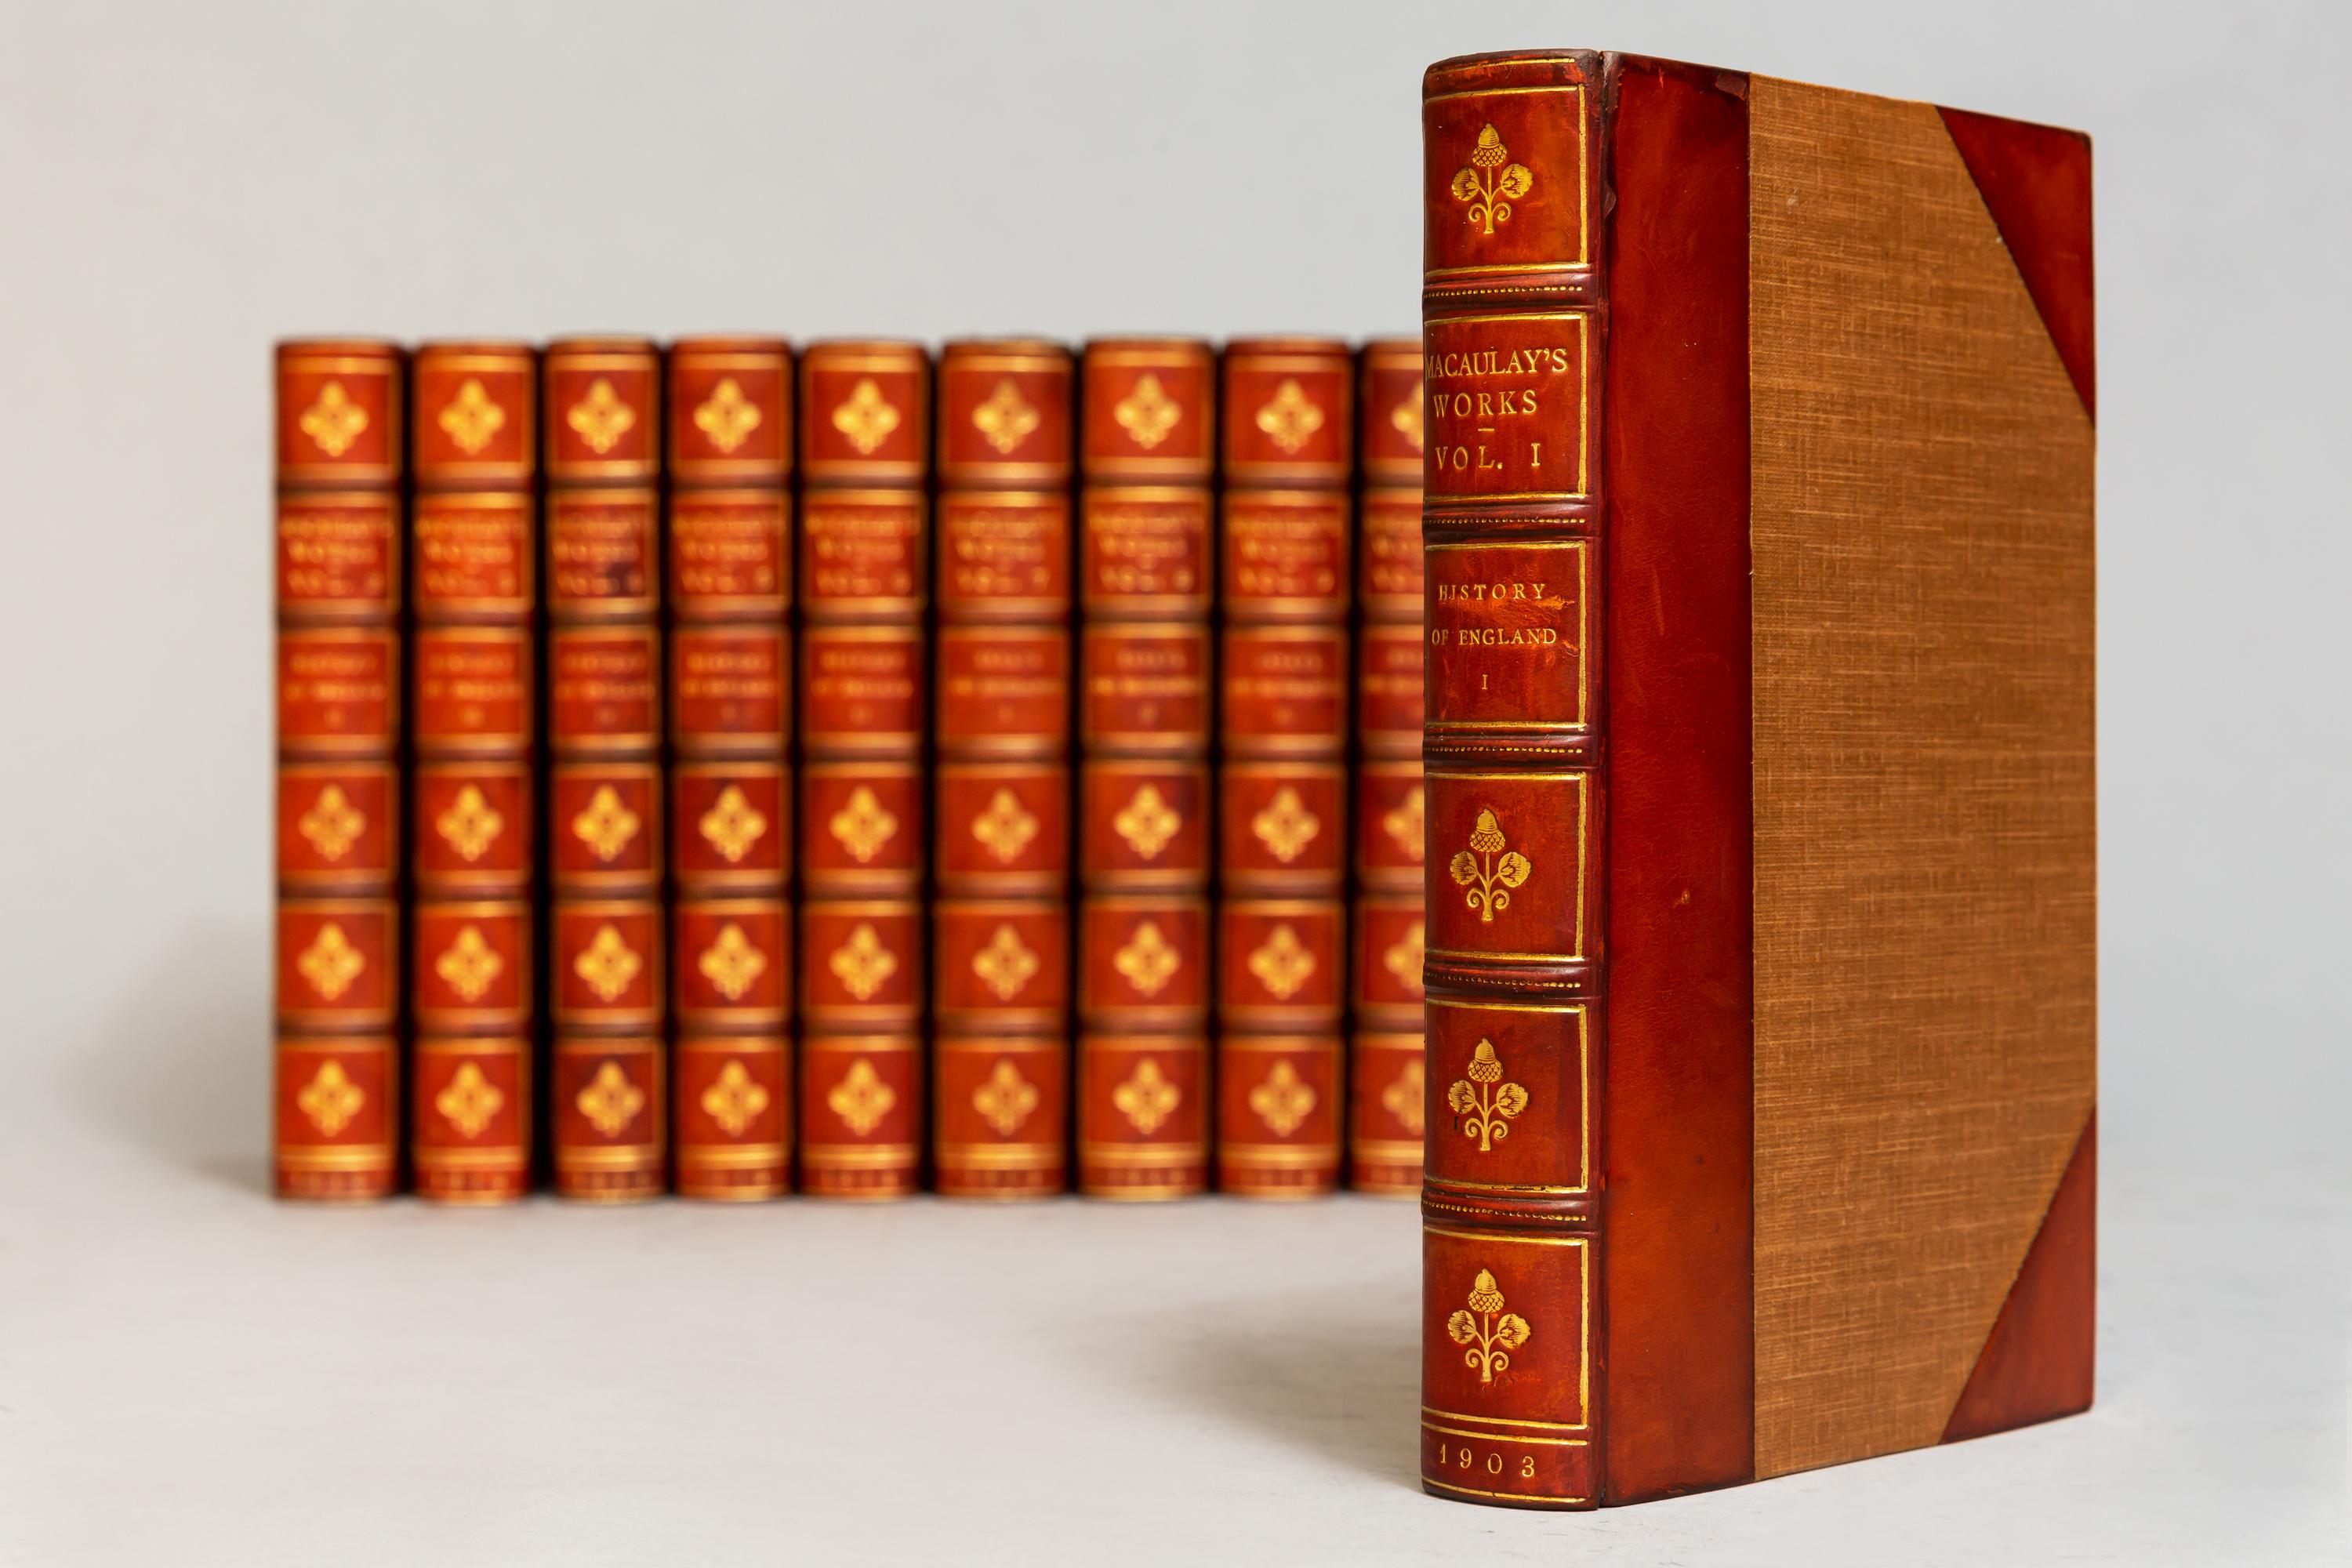 12 volumes.

History of England, speeches and poems and essays. Bound in 3/4 tan calf by Hatchards, cloth boards, top edges gilt, raised bands, gilt panels. Frontispieces.

Published: London: Longman’s Green & Co. 1903.